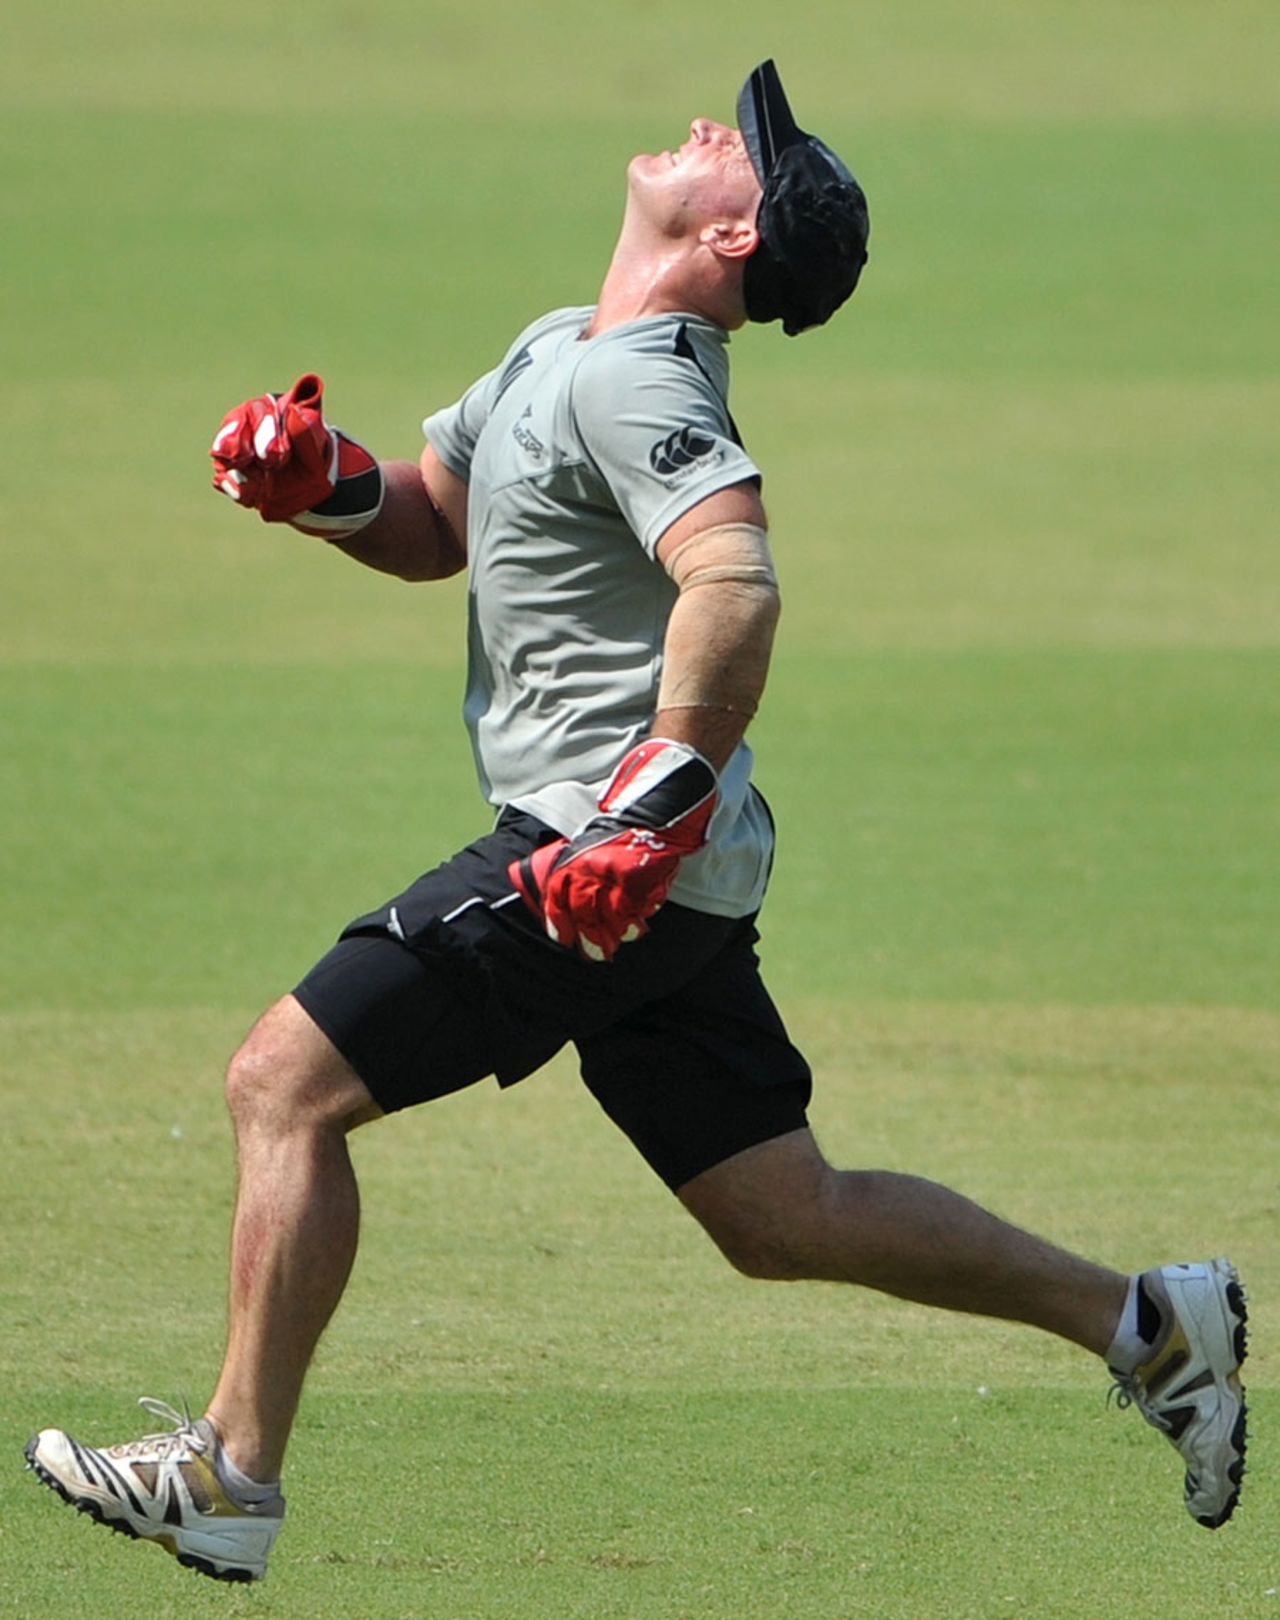 Gareth Hopkins tries to settle under a catch, Ahmedabad, November 3, 2010